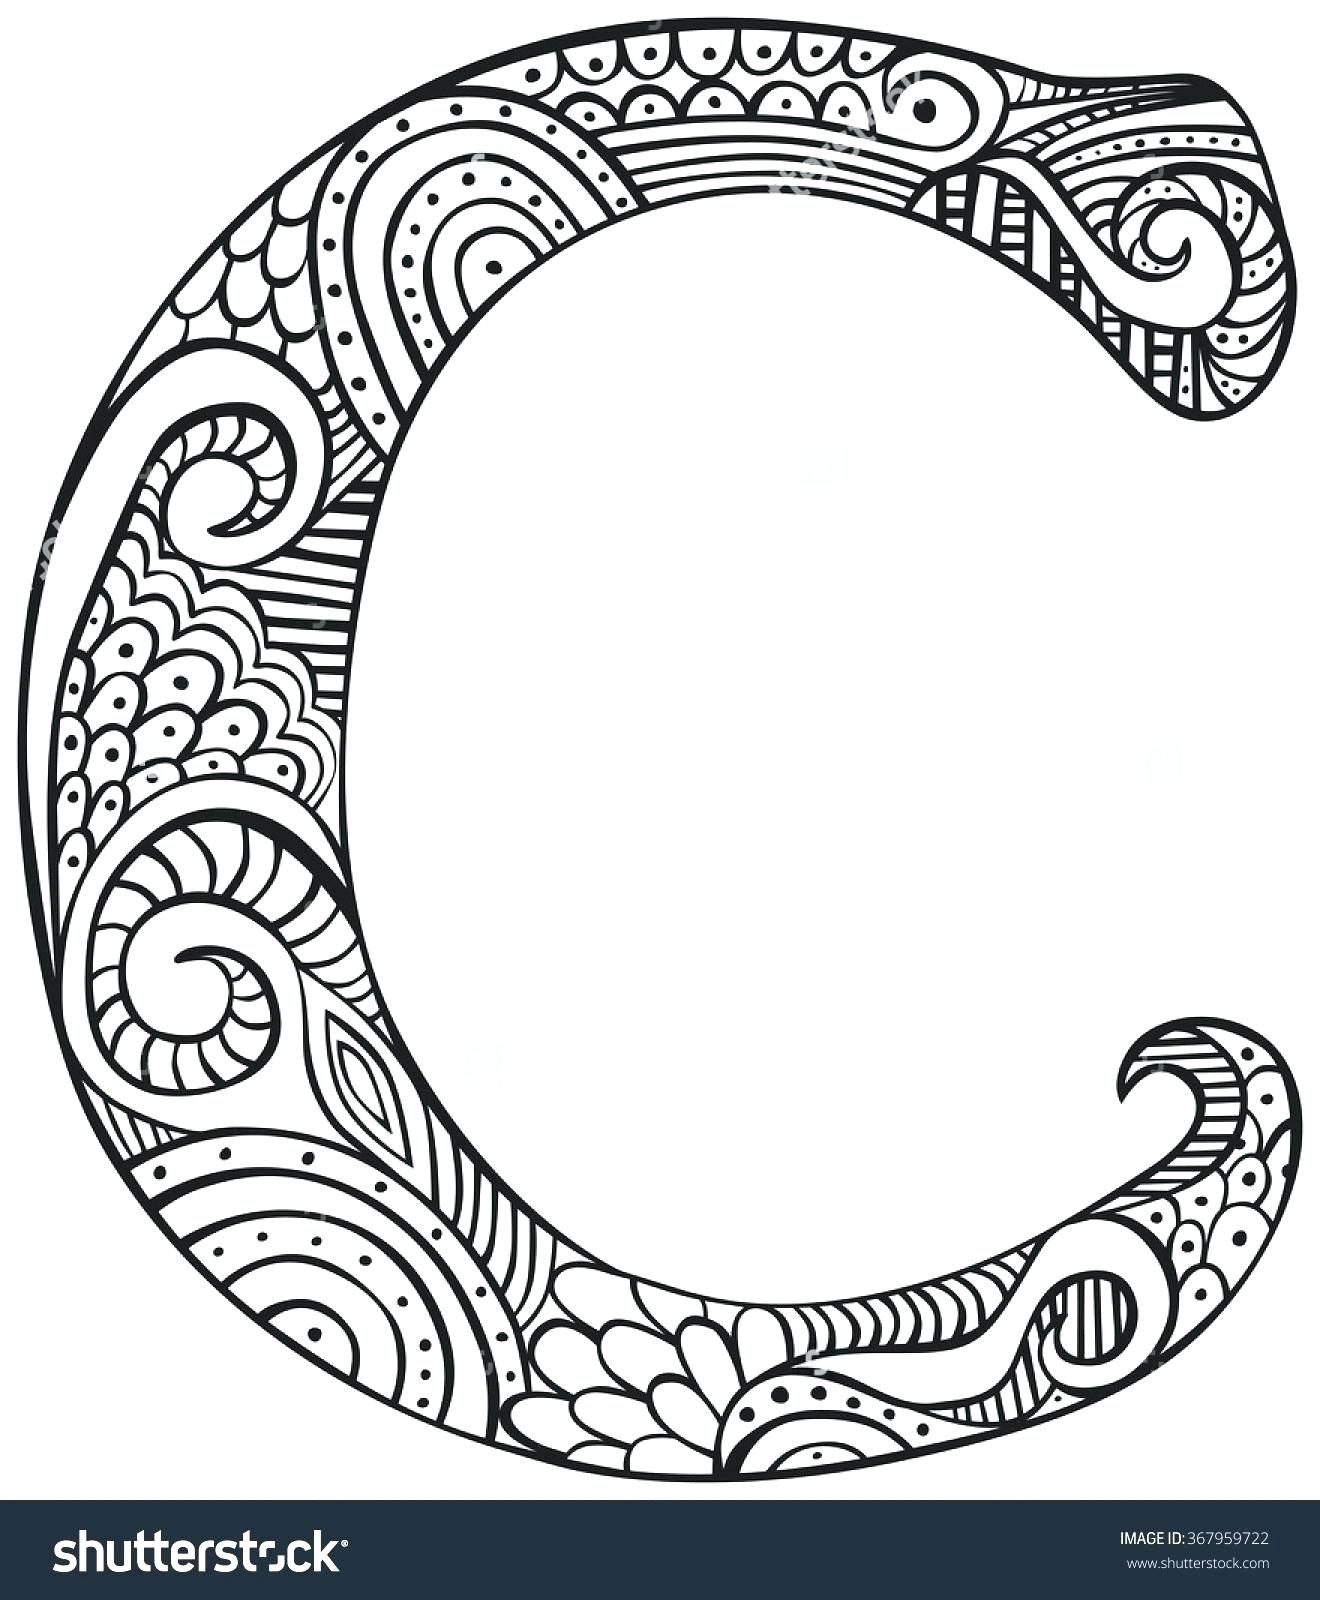 Letter C Coloring Pages For Preschoolers Coloring Pages Color Letter Rivetcolorco